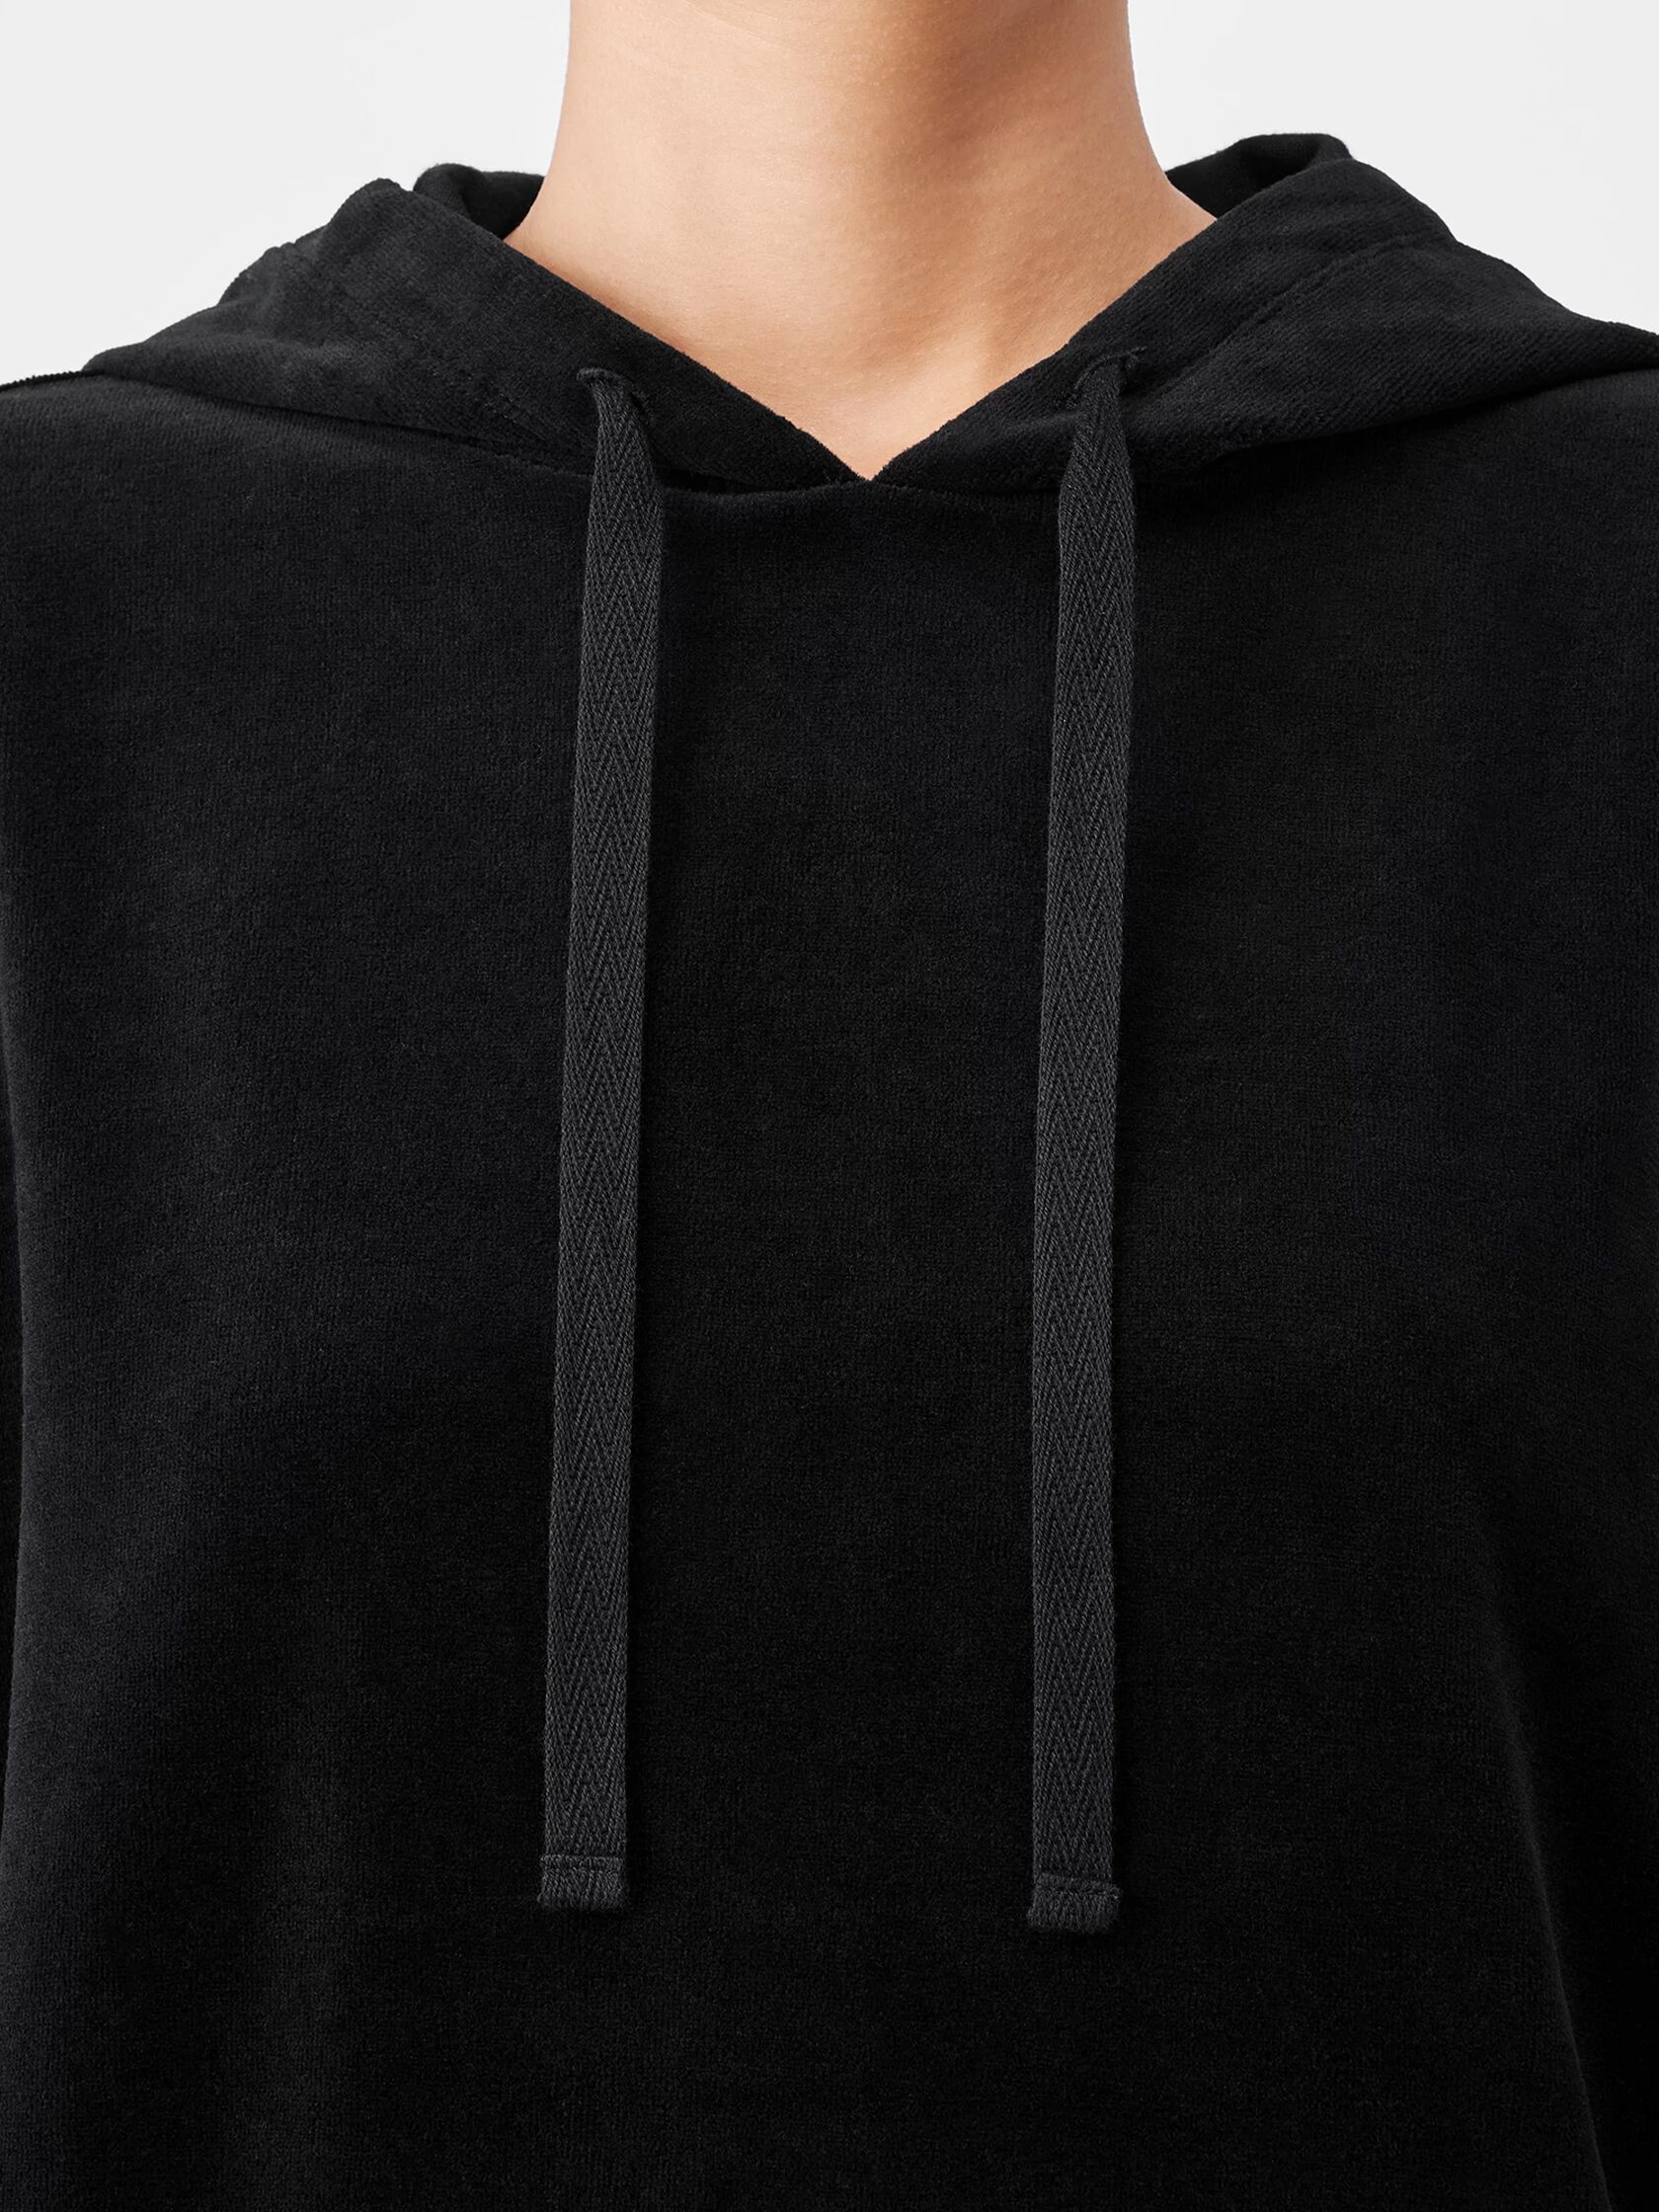 Cotton Velour Hooded Top